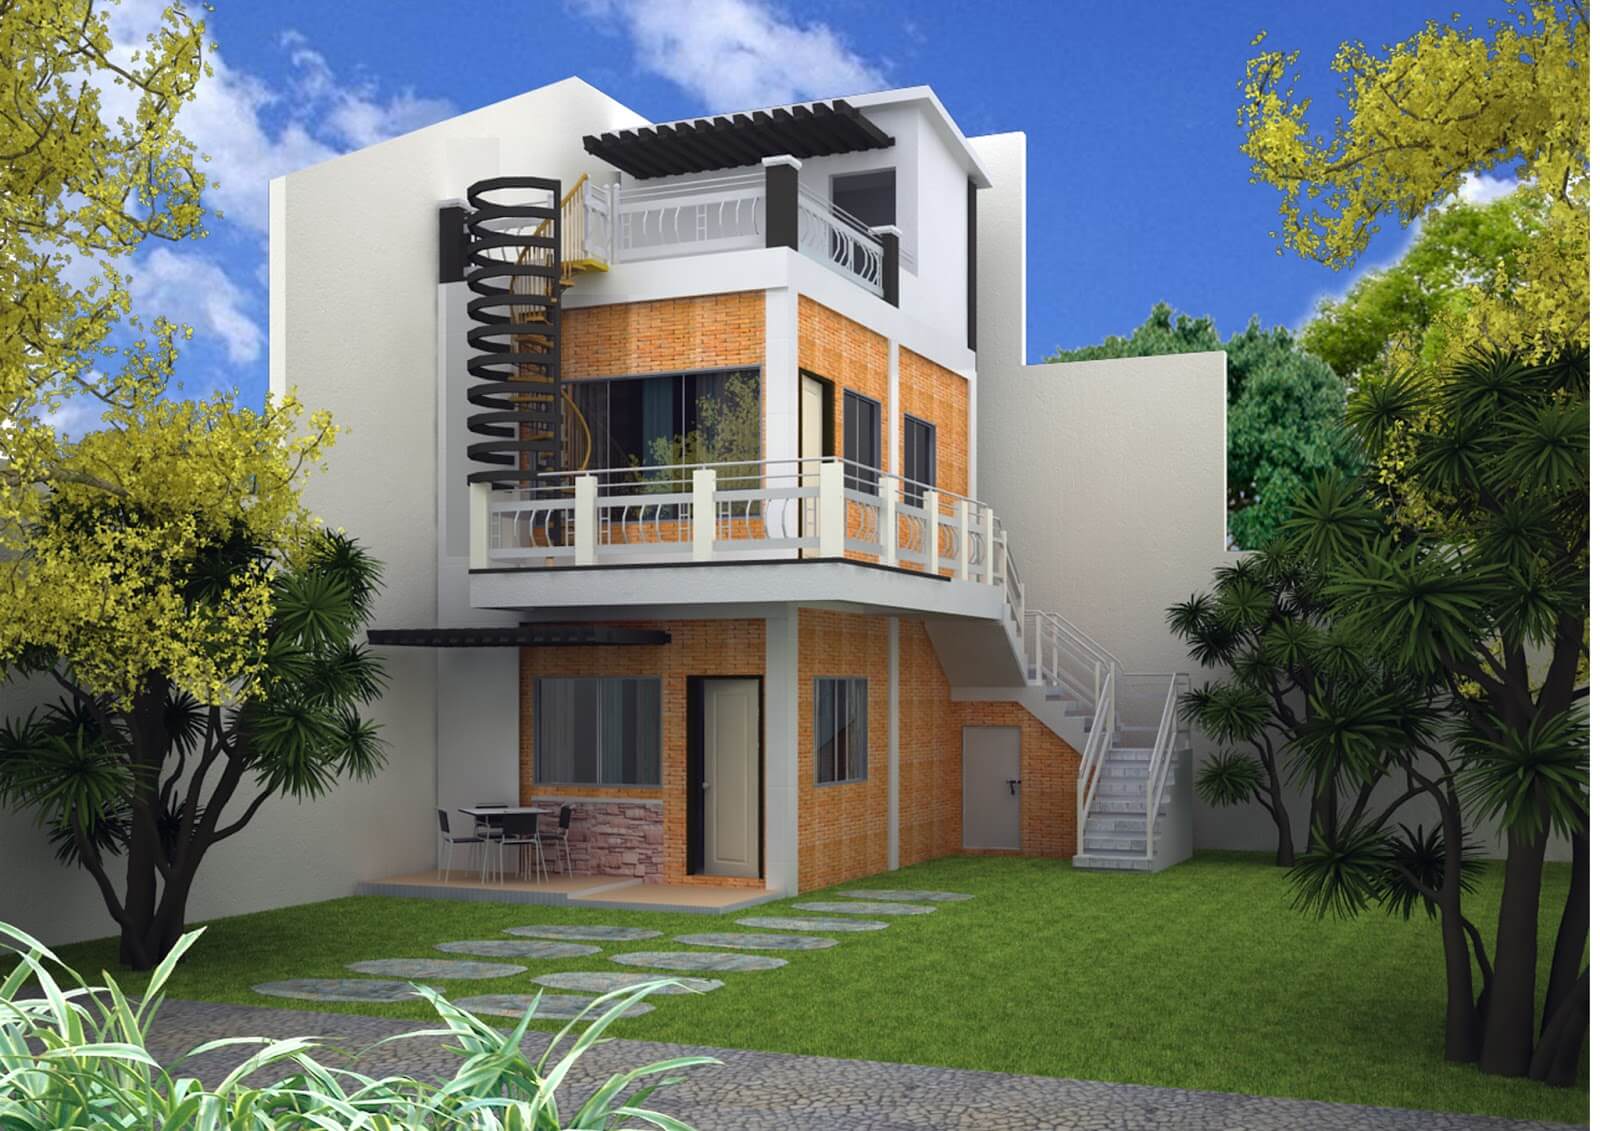 Best 3 Storey House Designs With Rooftop - Live Enhanced - Live Enhanced